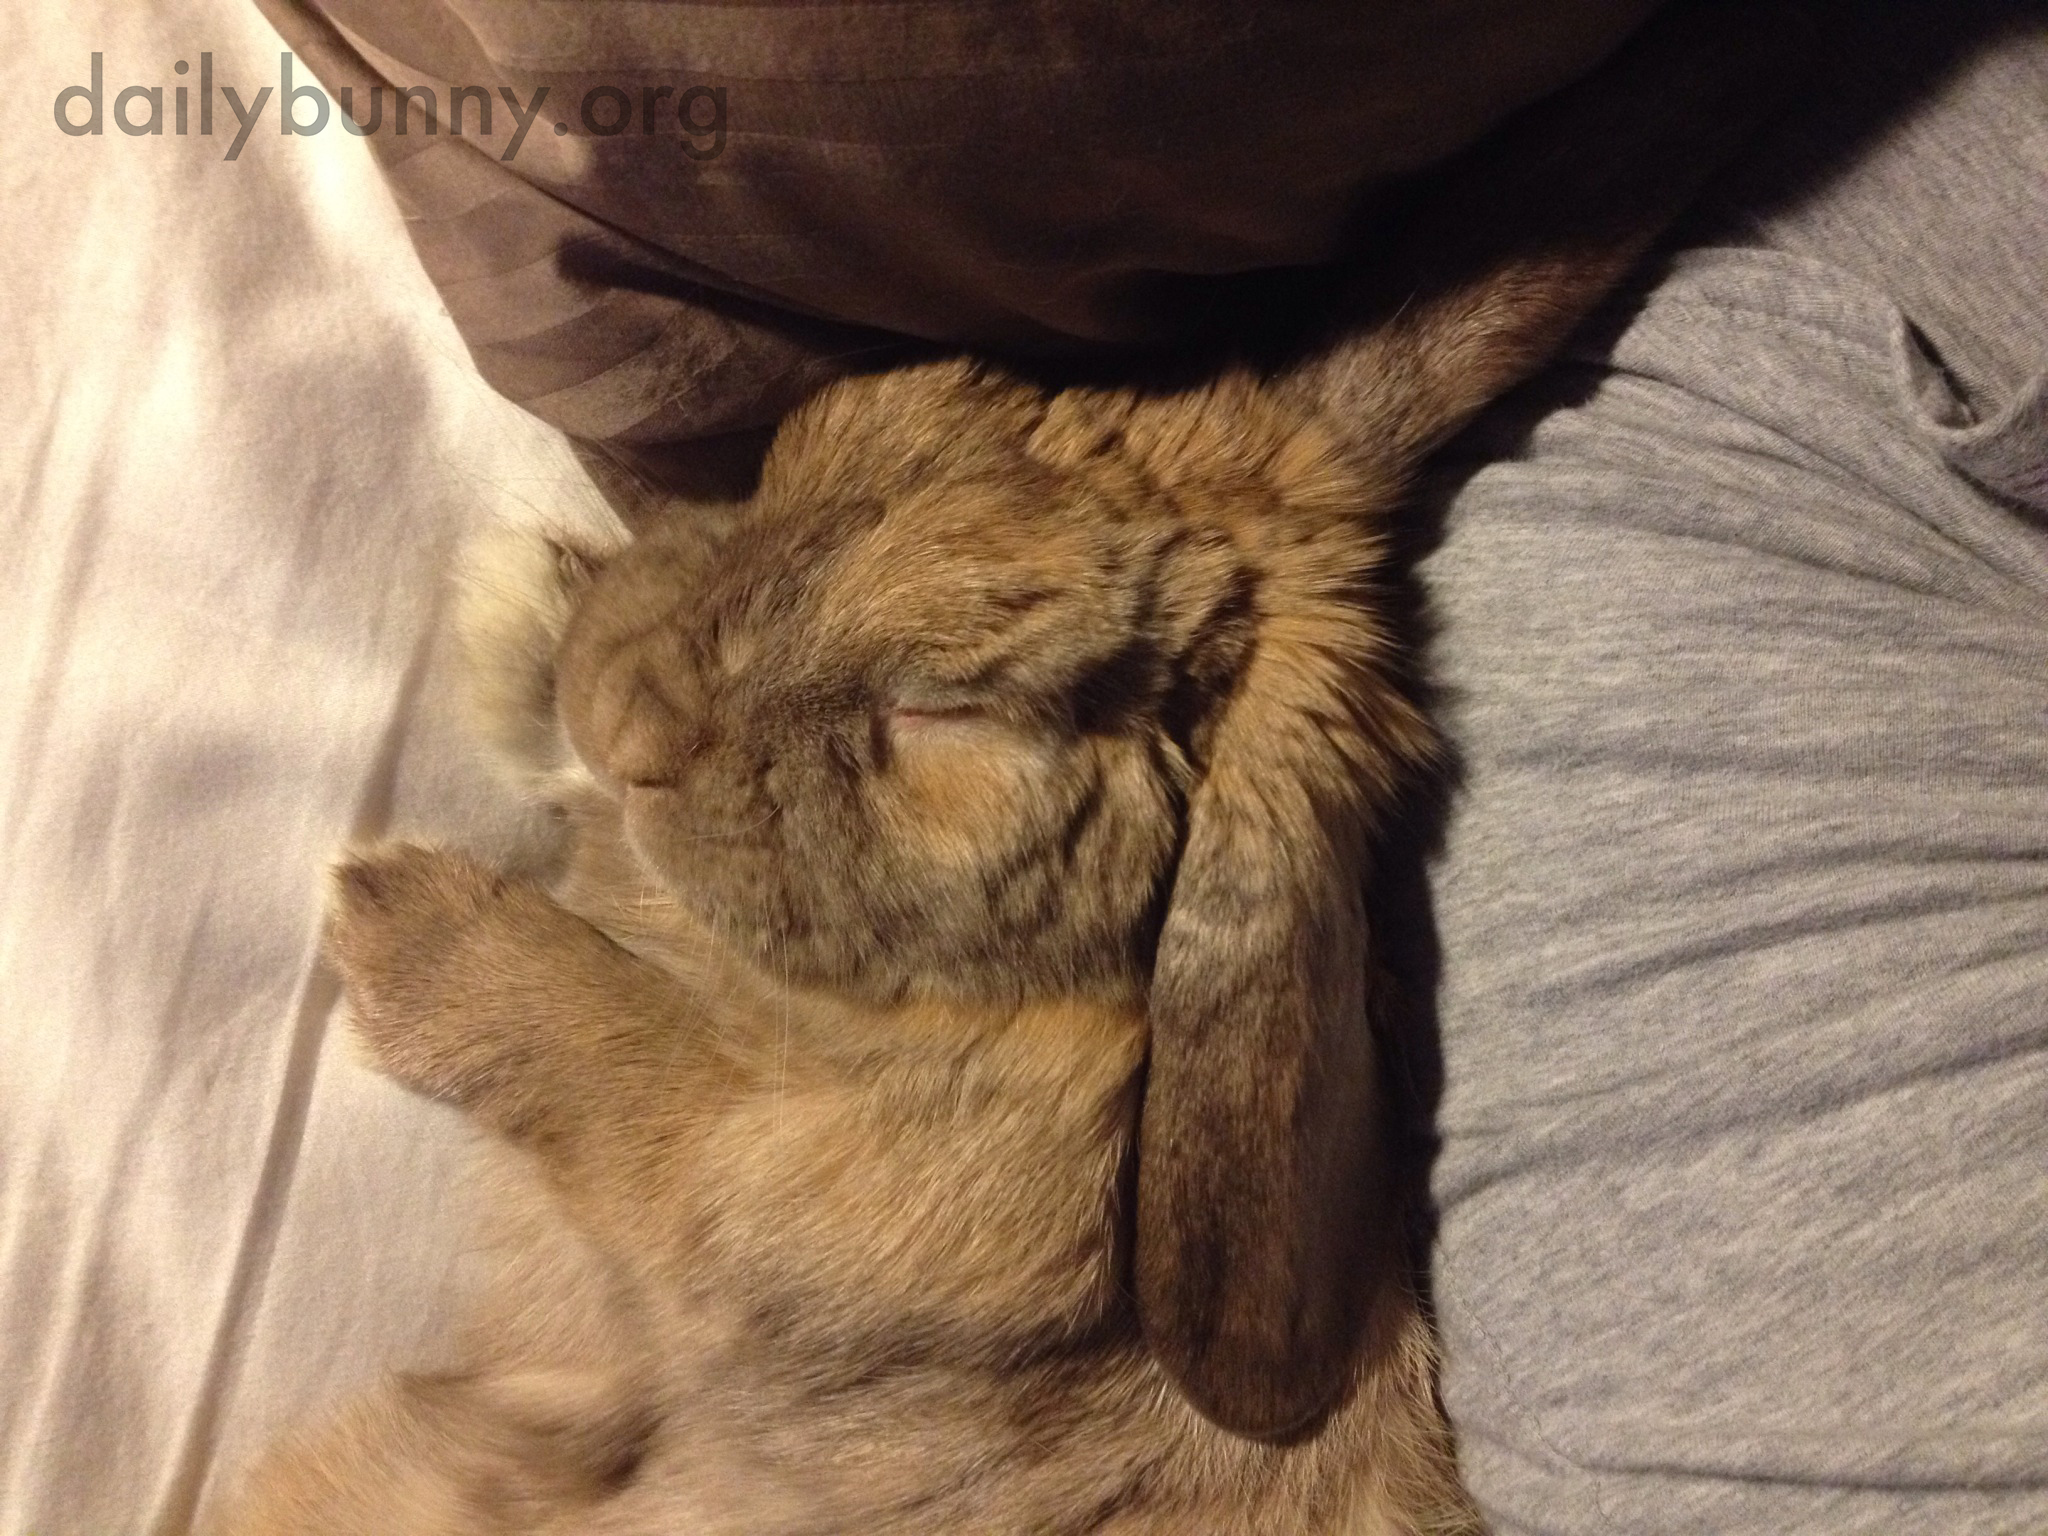 Don't Get Out of Bed or You'll Wake Up Bunny!